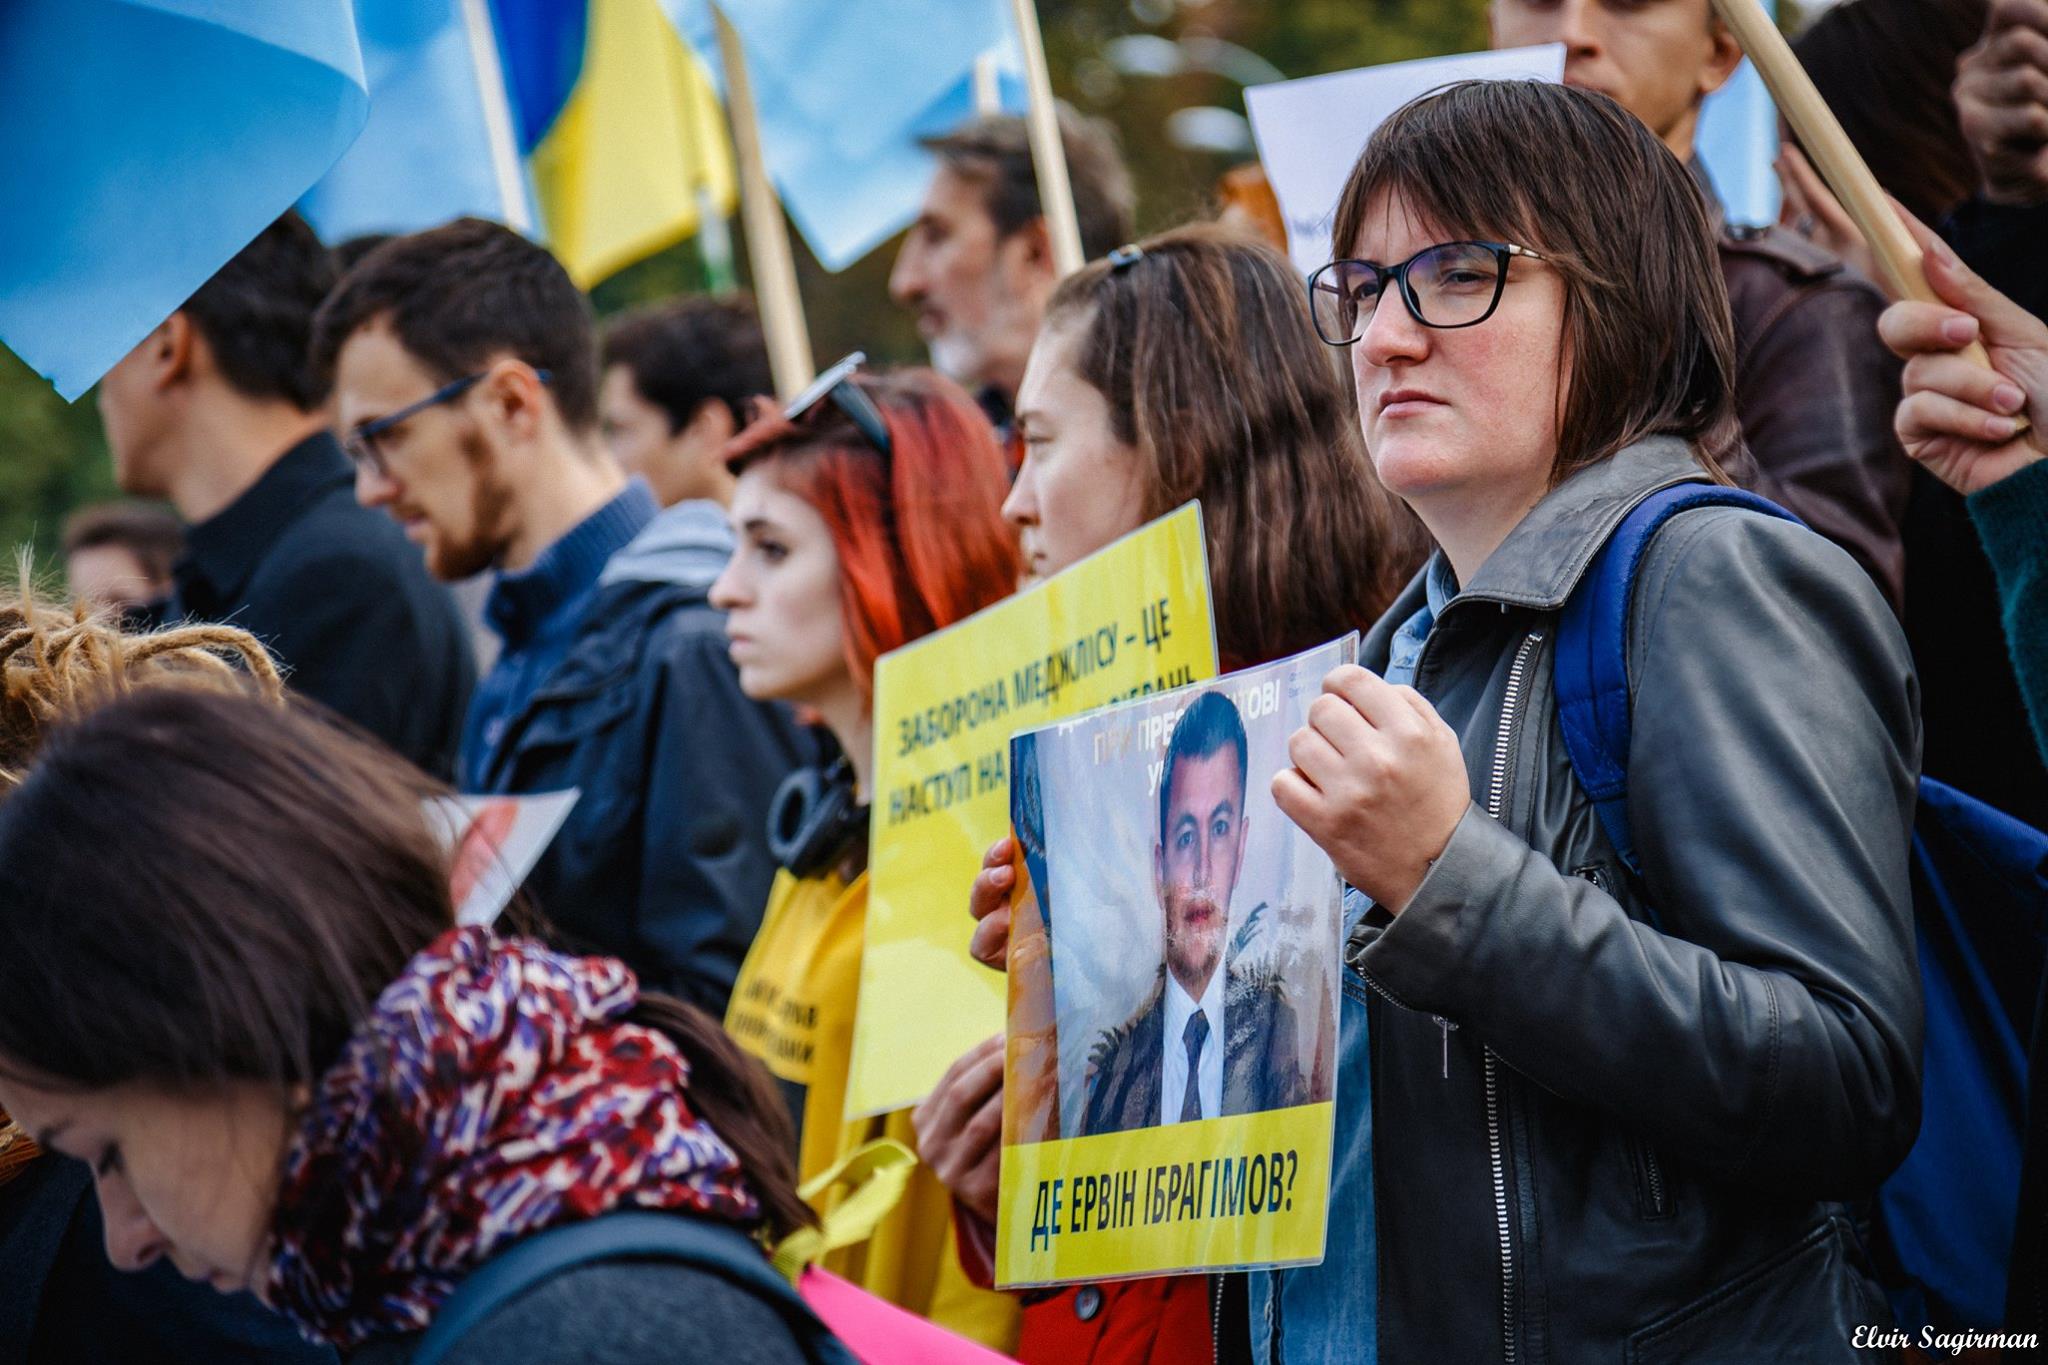 Activist holds sign saying "Where is Ervin Igragimov" on 29.09.2016 at the demonstration in support of the Mejlis in Kyiv. Photo: Elvir Sagirman